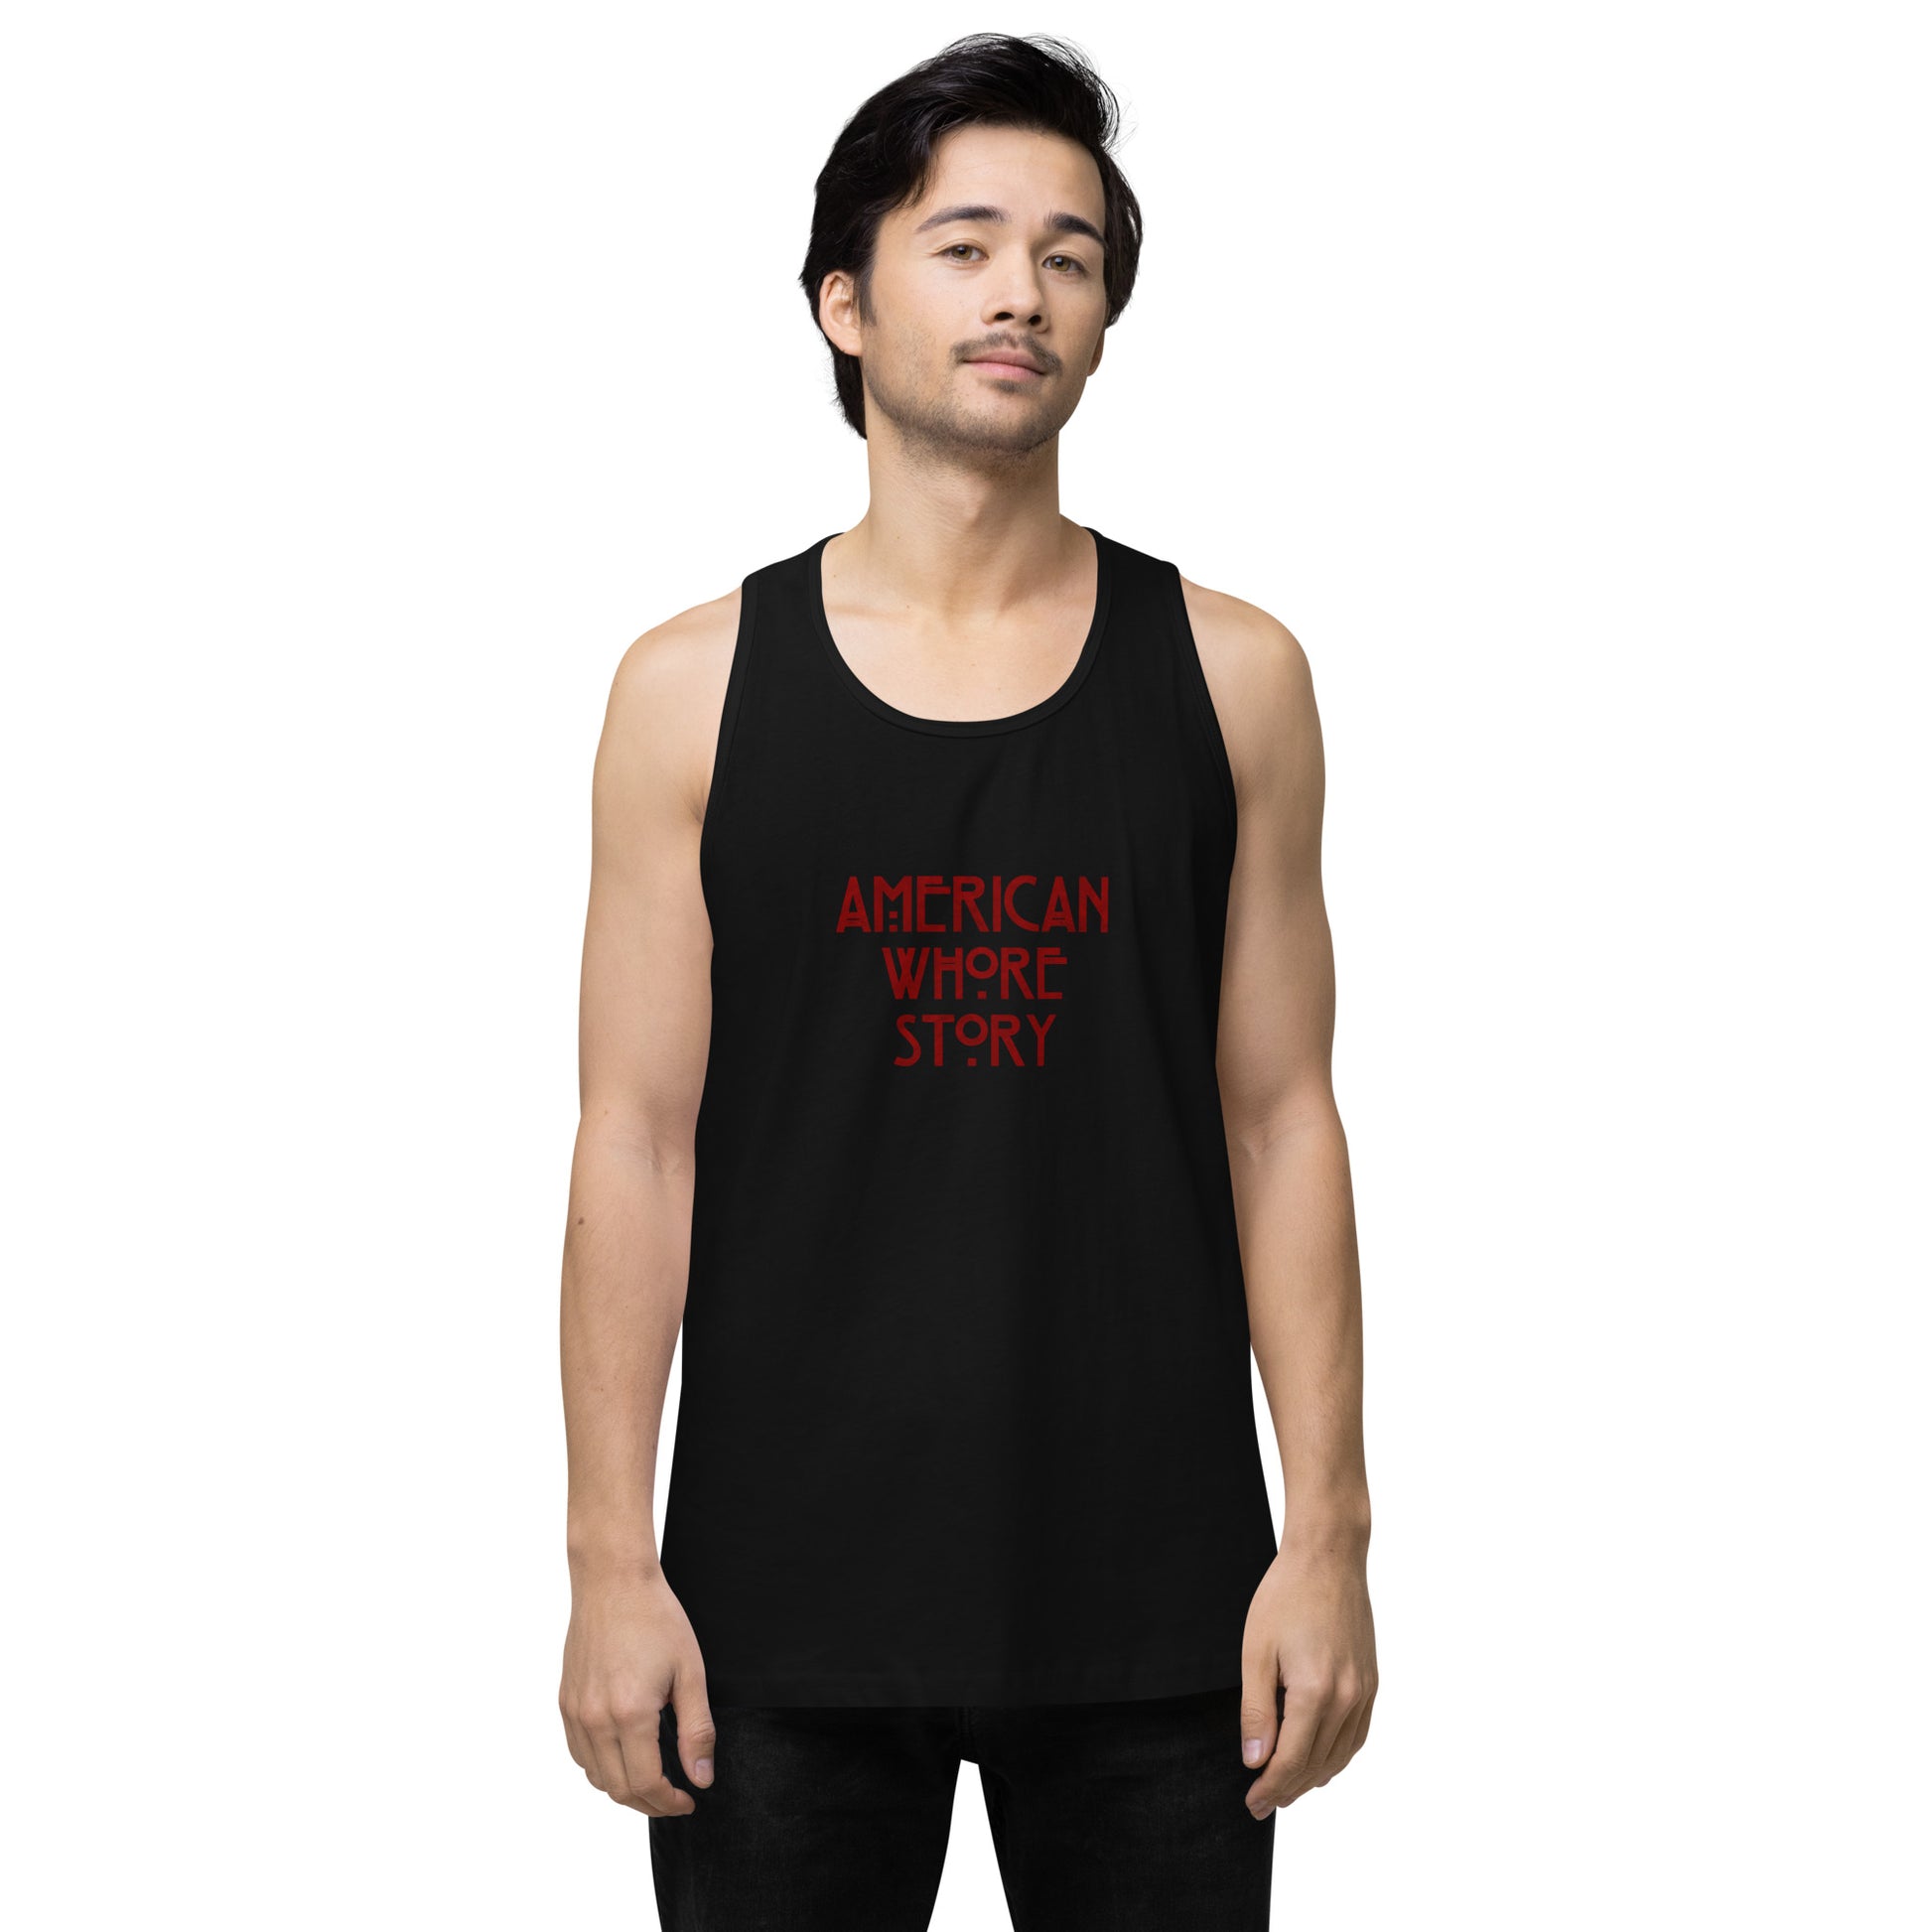 Unisex premium tank top by Moody Booty Apparel featuring 'American Whore Story' distressed red lettering. Trendy LGBTQ-themed graphic shirt with irreverent humor, perfect for gay, queer, and LGBTQ individuals. Make a bold statement with this fashionable and inclusive design.